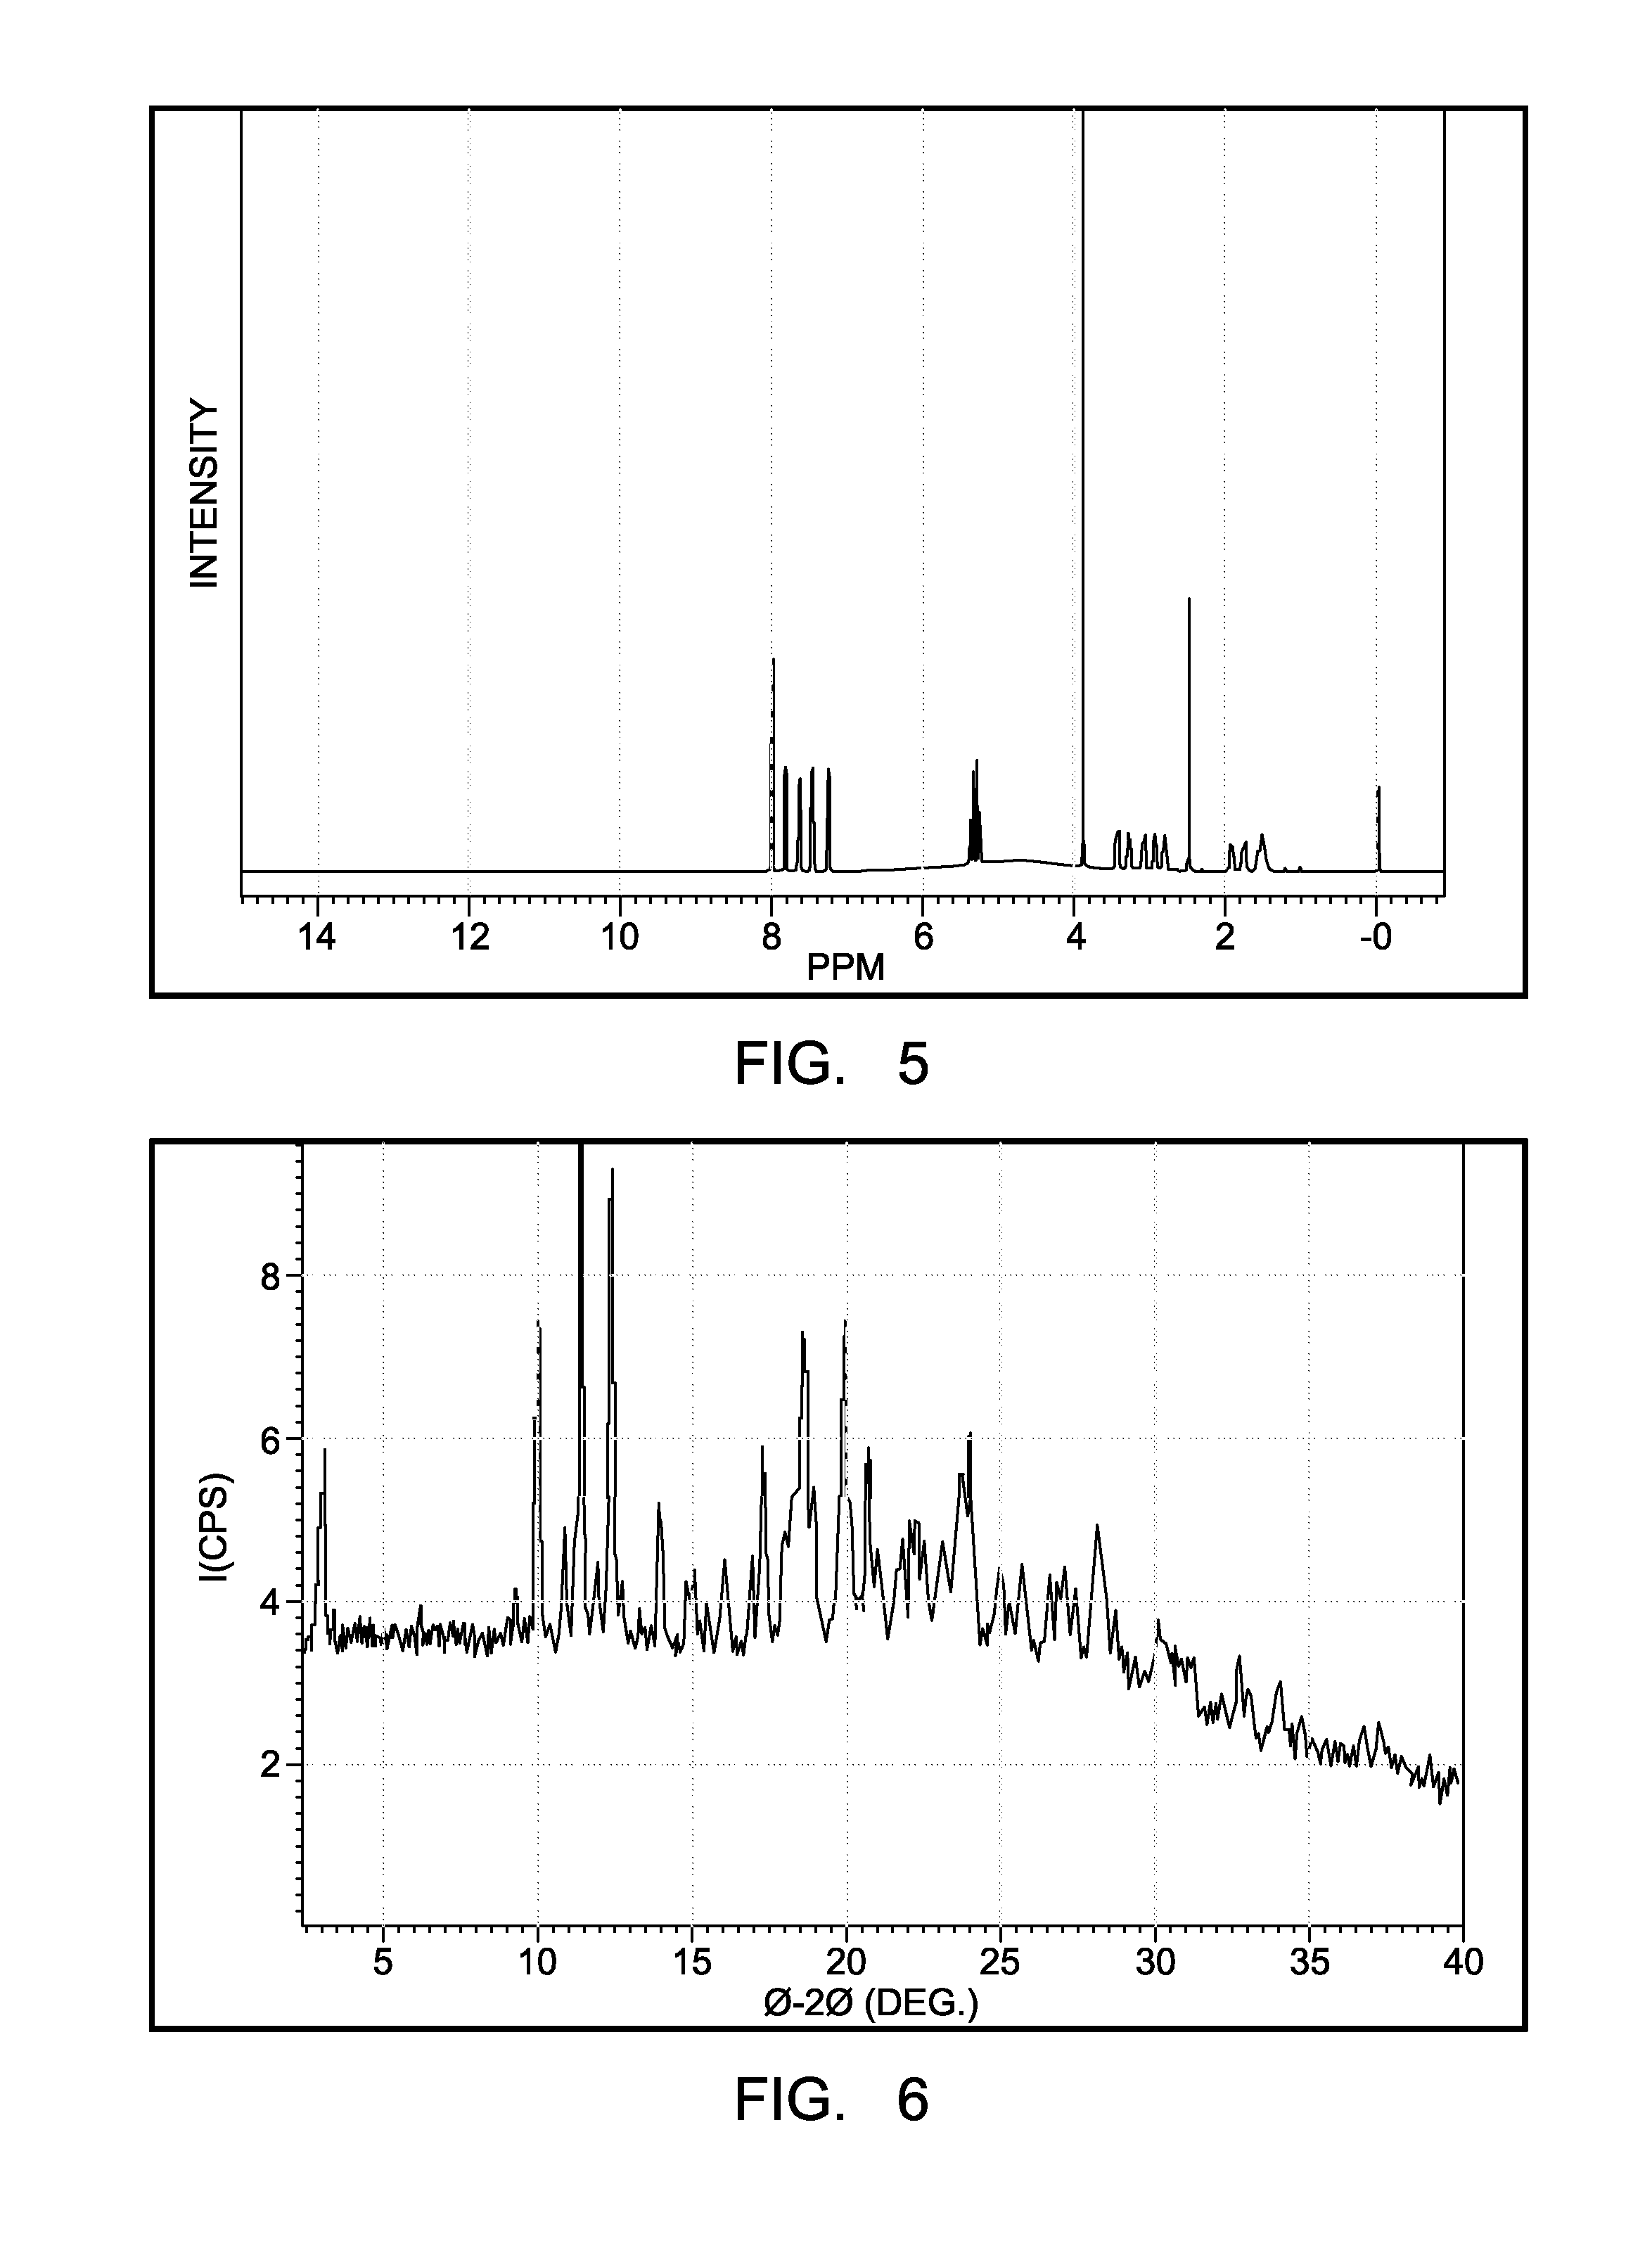 Polymorphs of tartrate salt of 2-[2-(3-(r)-amino-piperidin-1-yl)-5-fluoro-6-oxo-6h-pyrimidin-1-ylmethyl]-benzonitrile and methods of use therefor